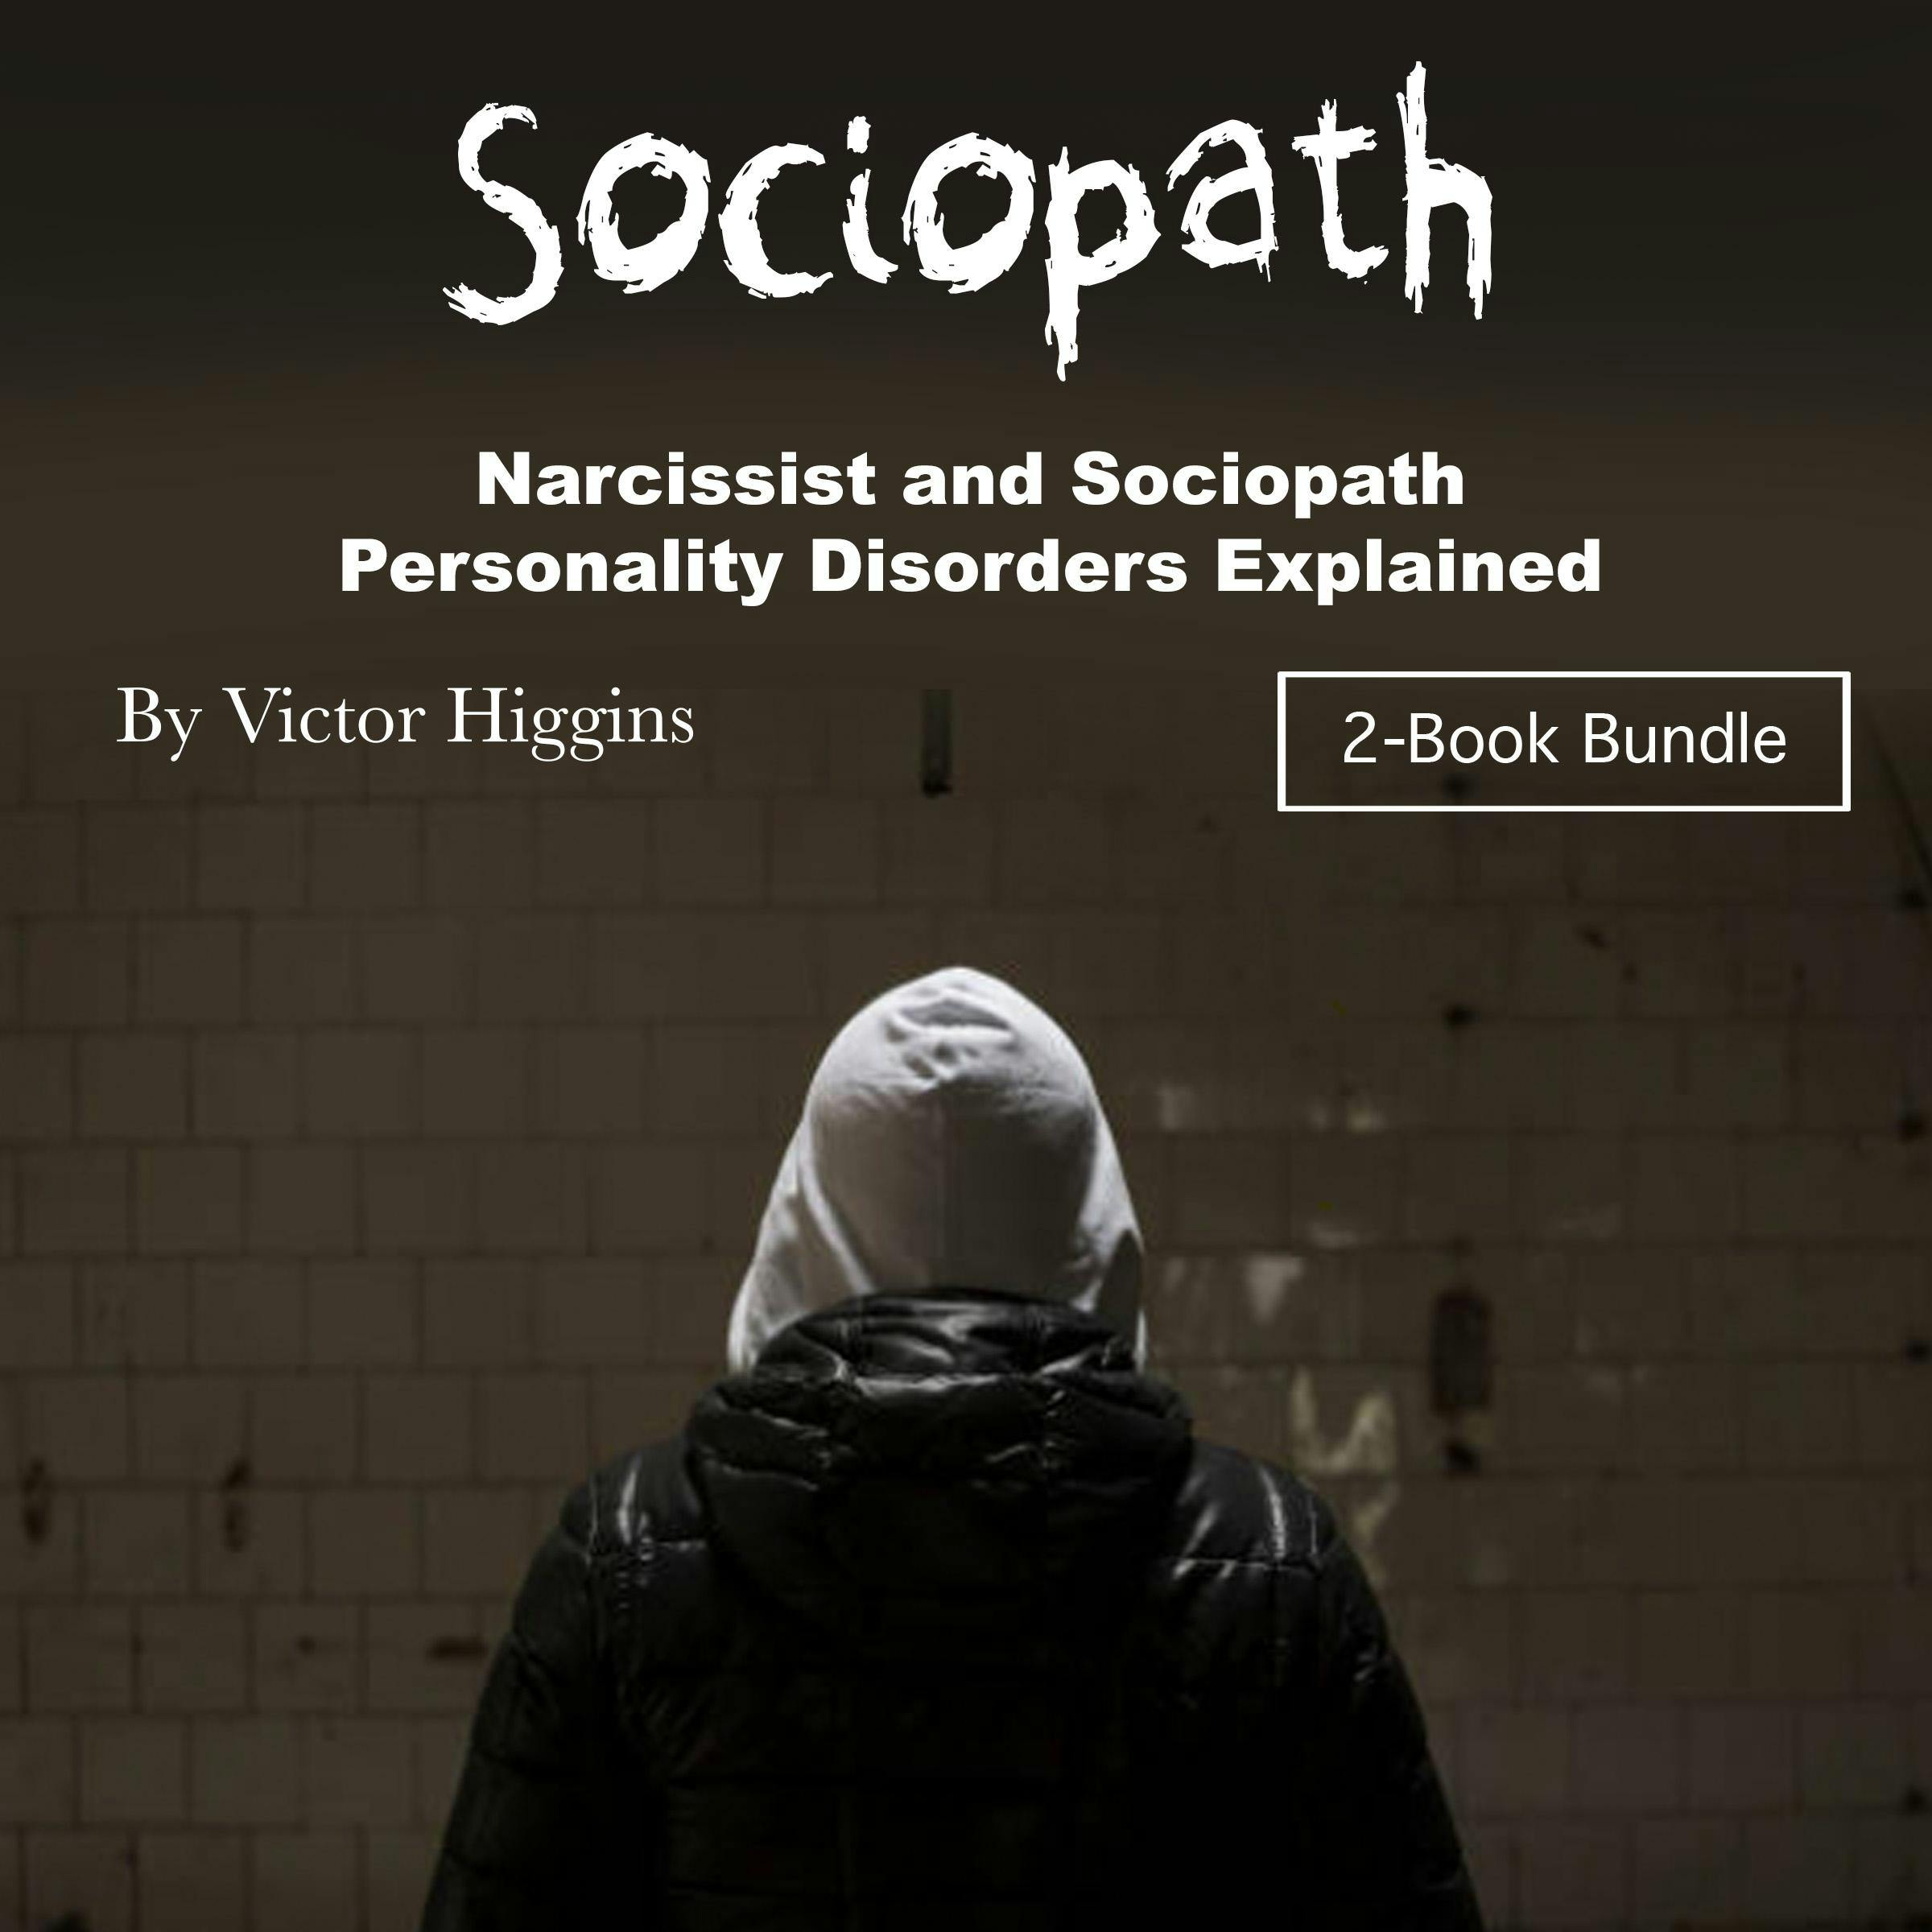 Sociopath: Narcissist and Sociopath Personality Disorders Explained - Victor Higgins